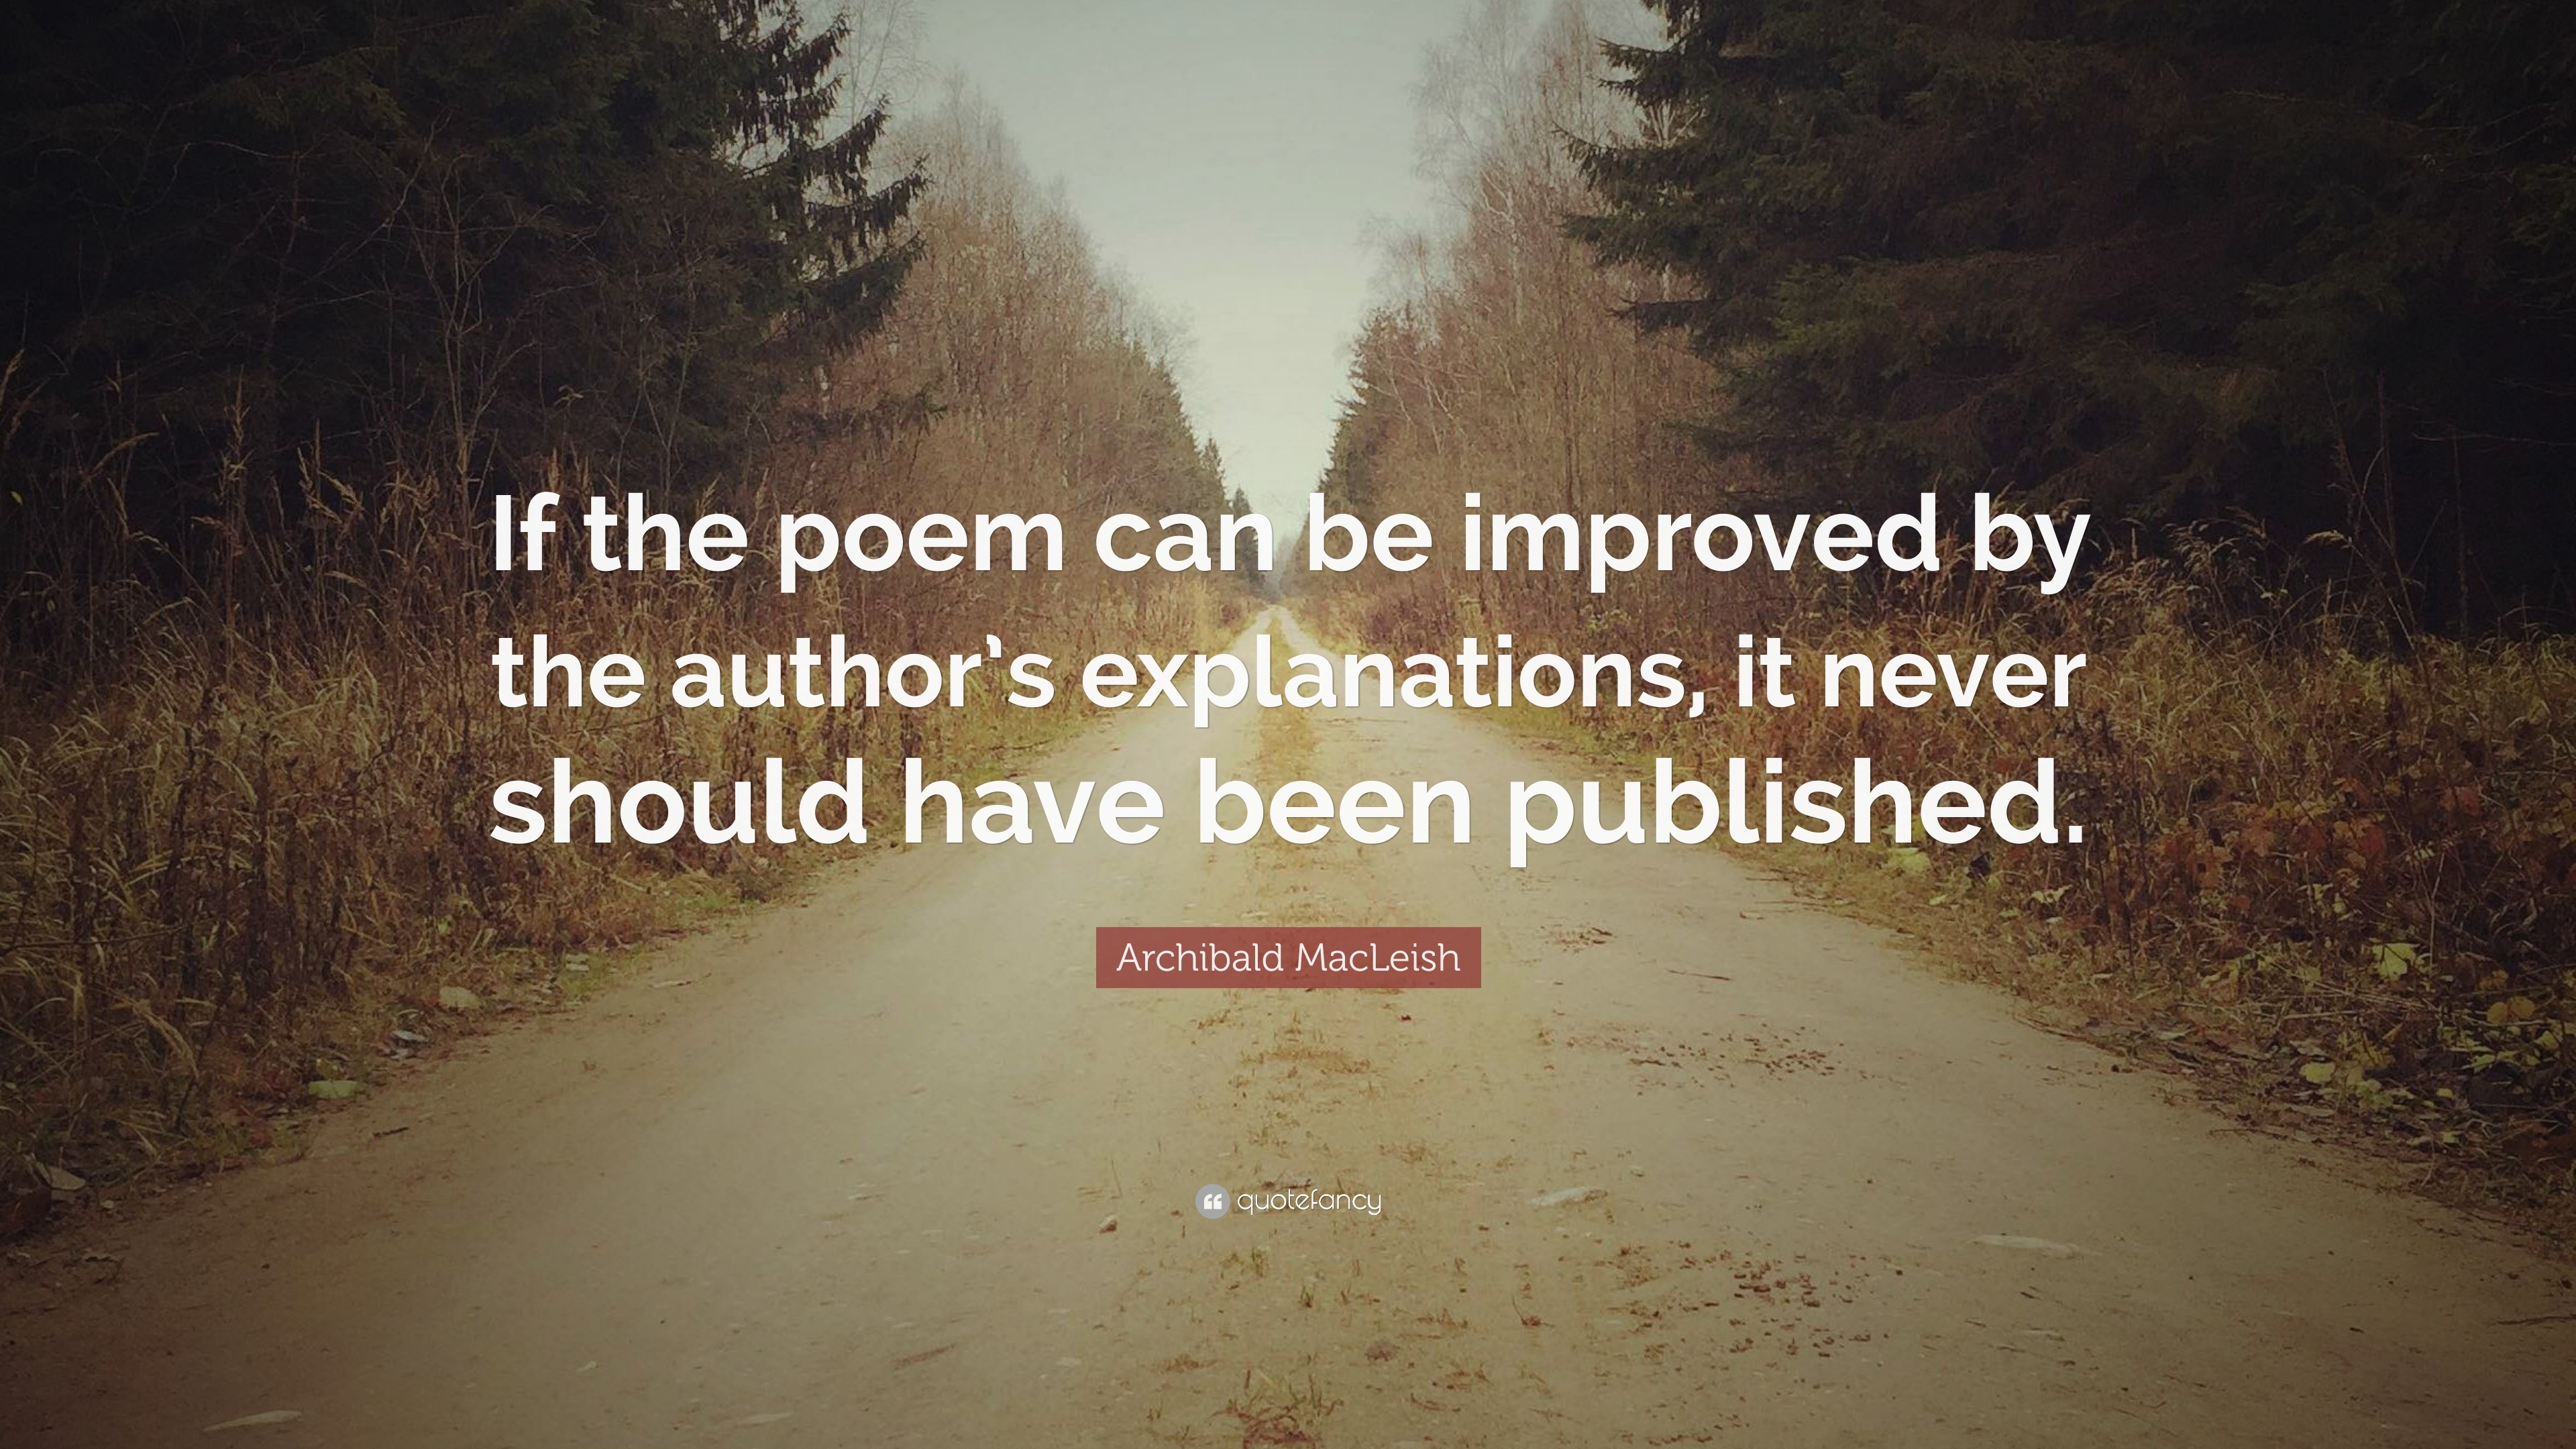 Archibald MacLeish Quote: “If the poem can be improved by the author’s ...